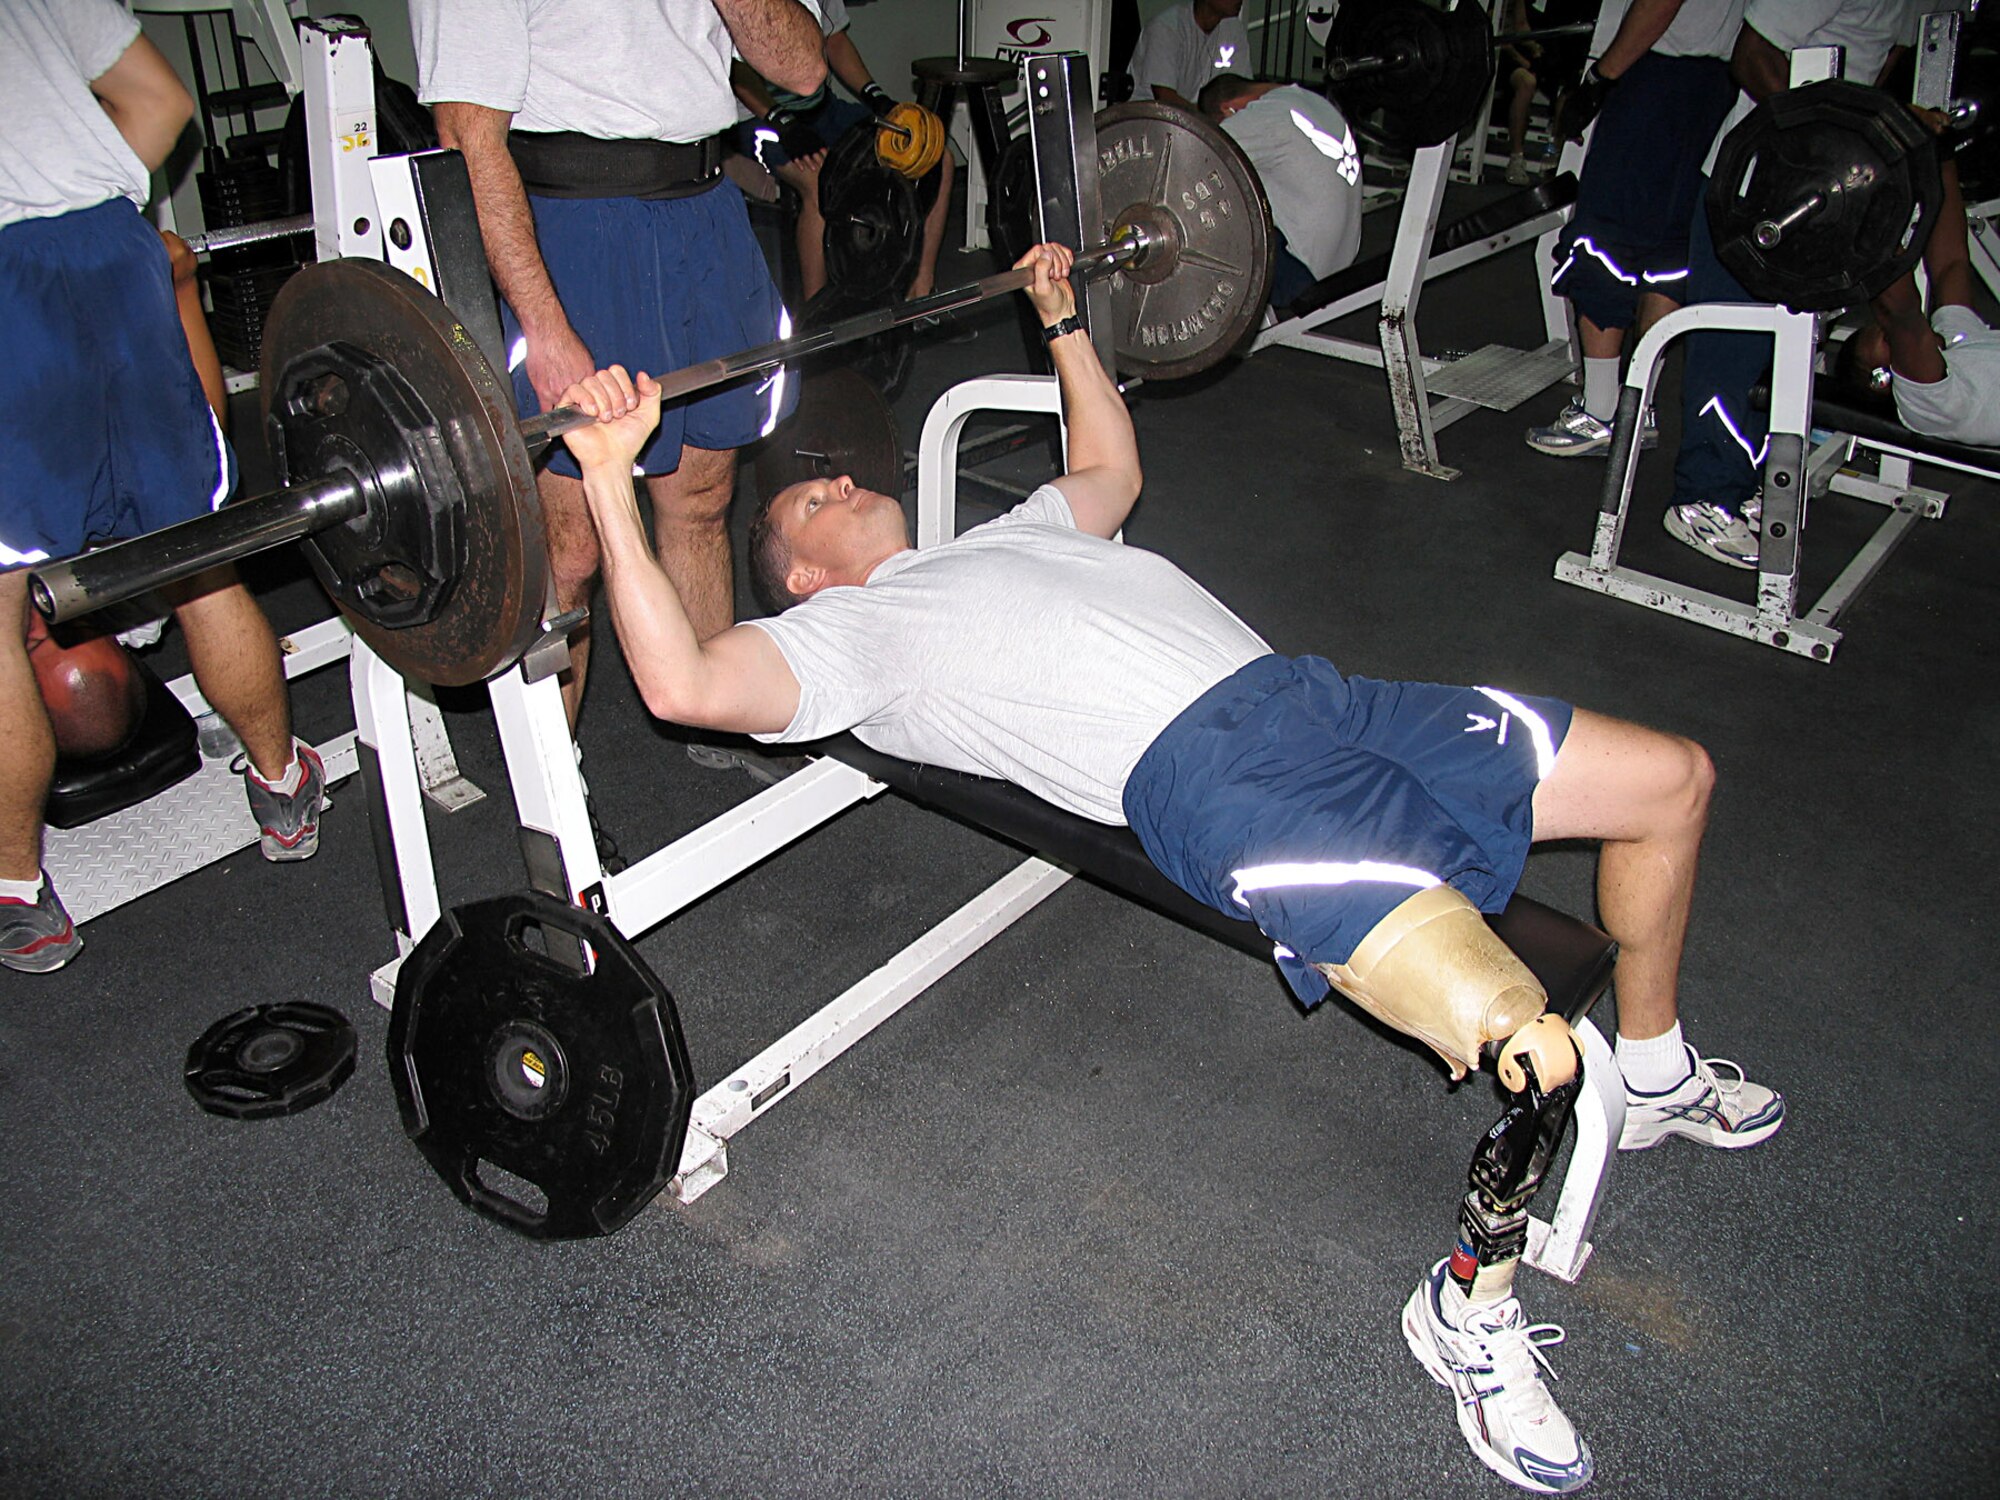 SOUTHWEST ASIA (AFPN) -- Maj. Alan Brown does some bench presses at the gym. He is scheduled to attend pilot re-qualification training. He lost his leg more than seven years ago during a hunting accident. (U.S. Air Force photo by Tech. Sgt. Mark Getsy)